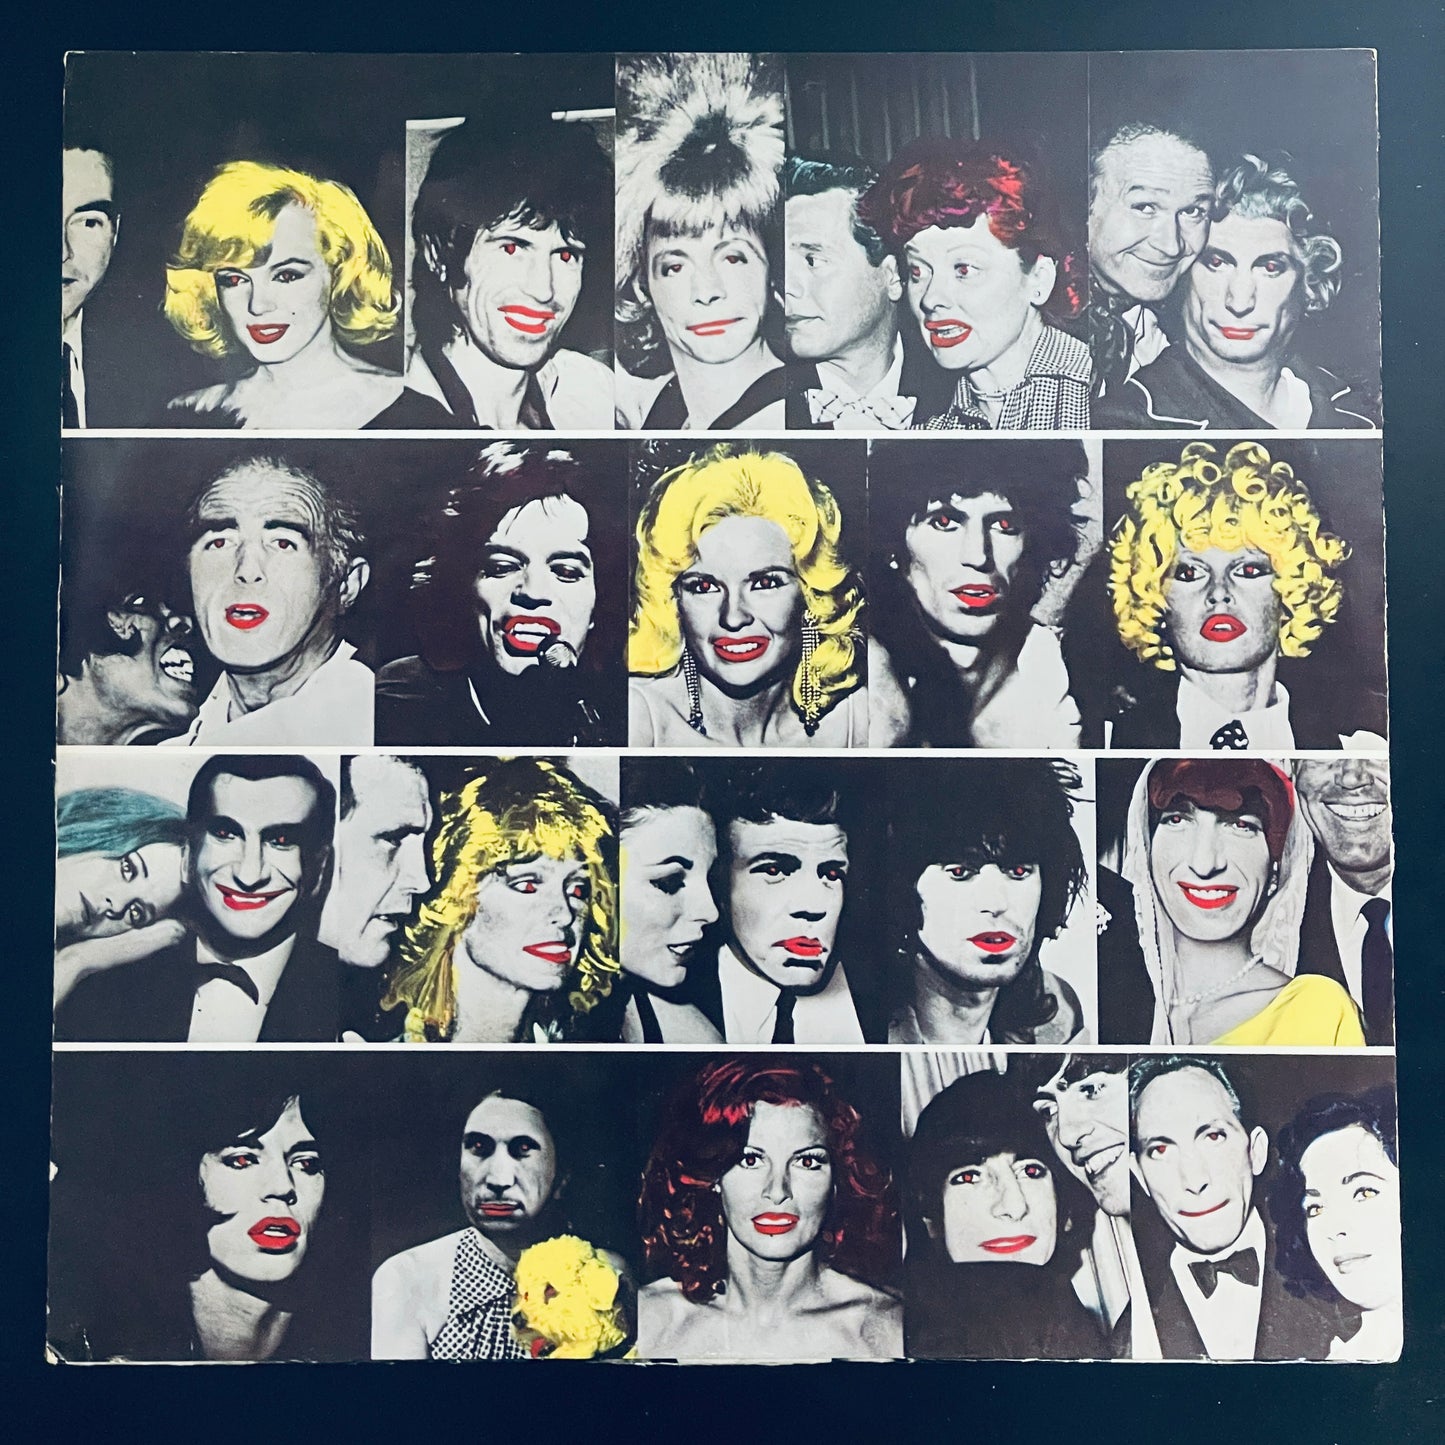 The Rolling Stones - Some Girls original LP (used)